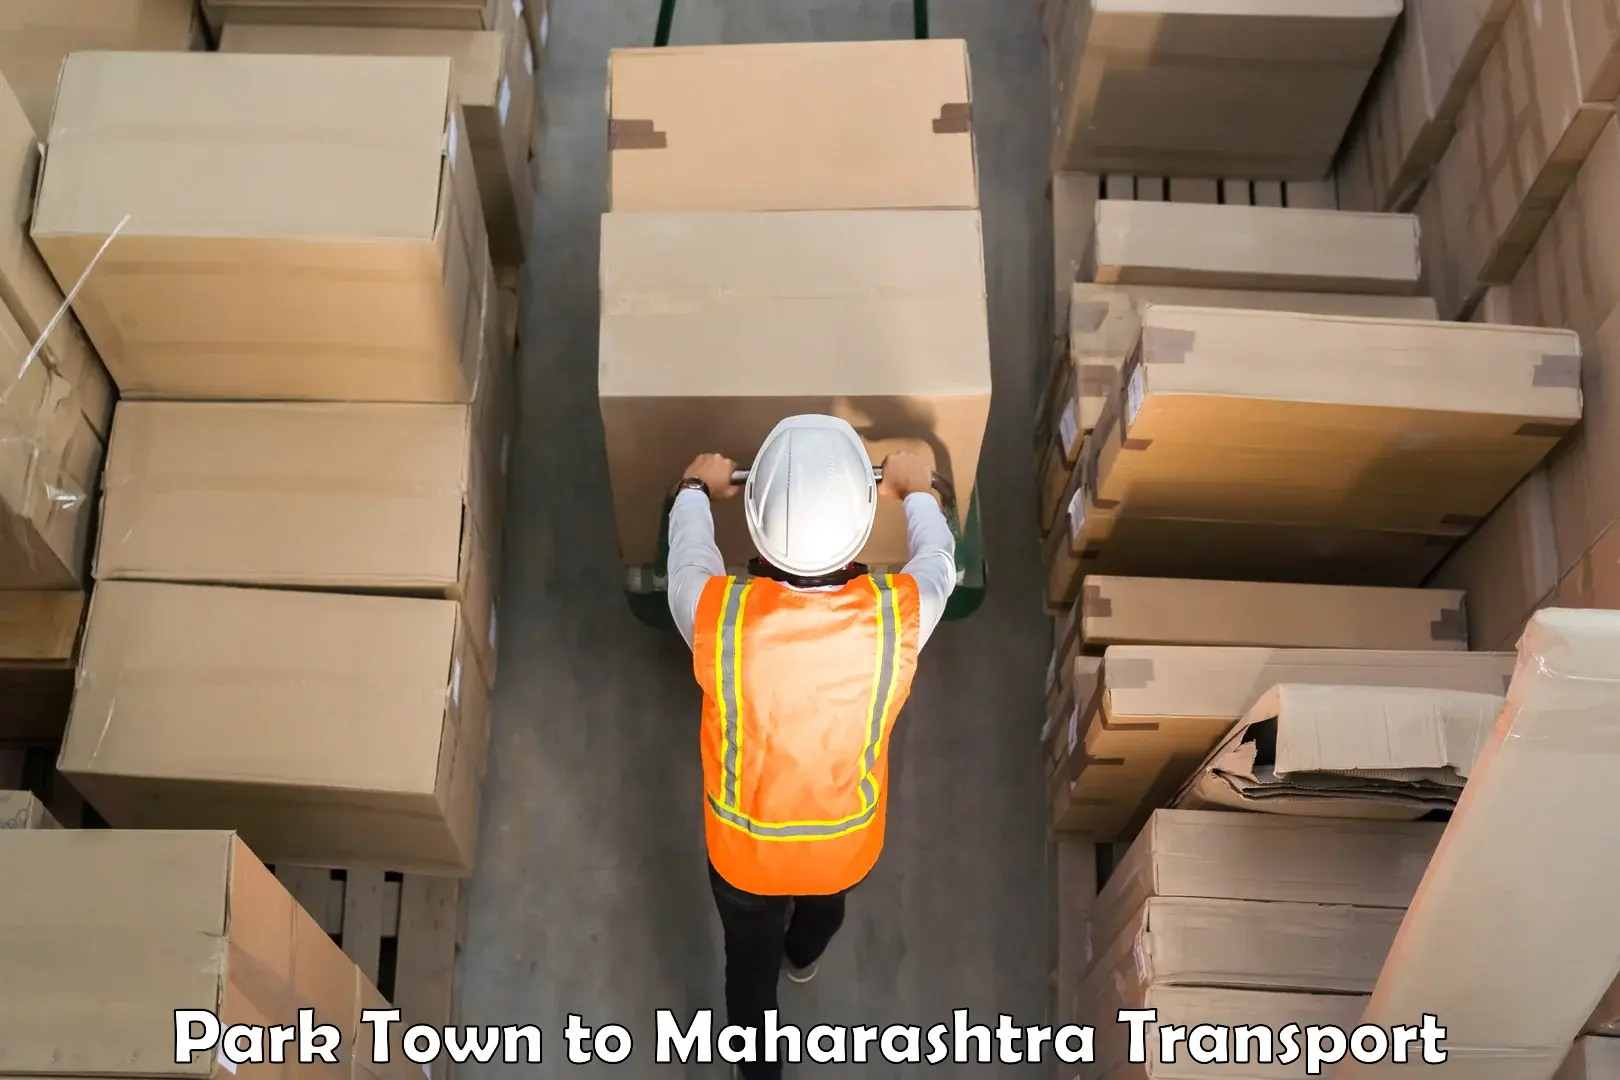 Air freight transport services Park Town to Jalna